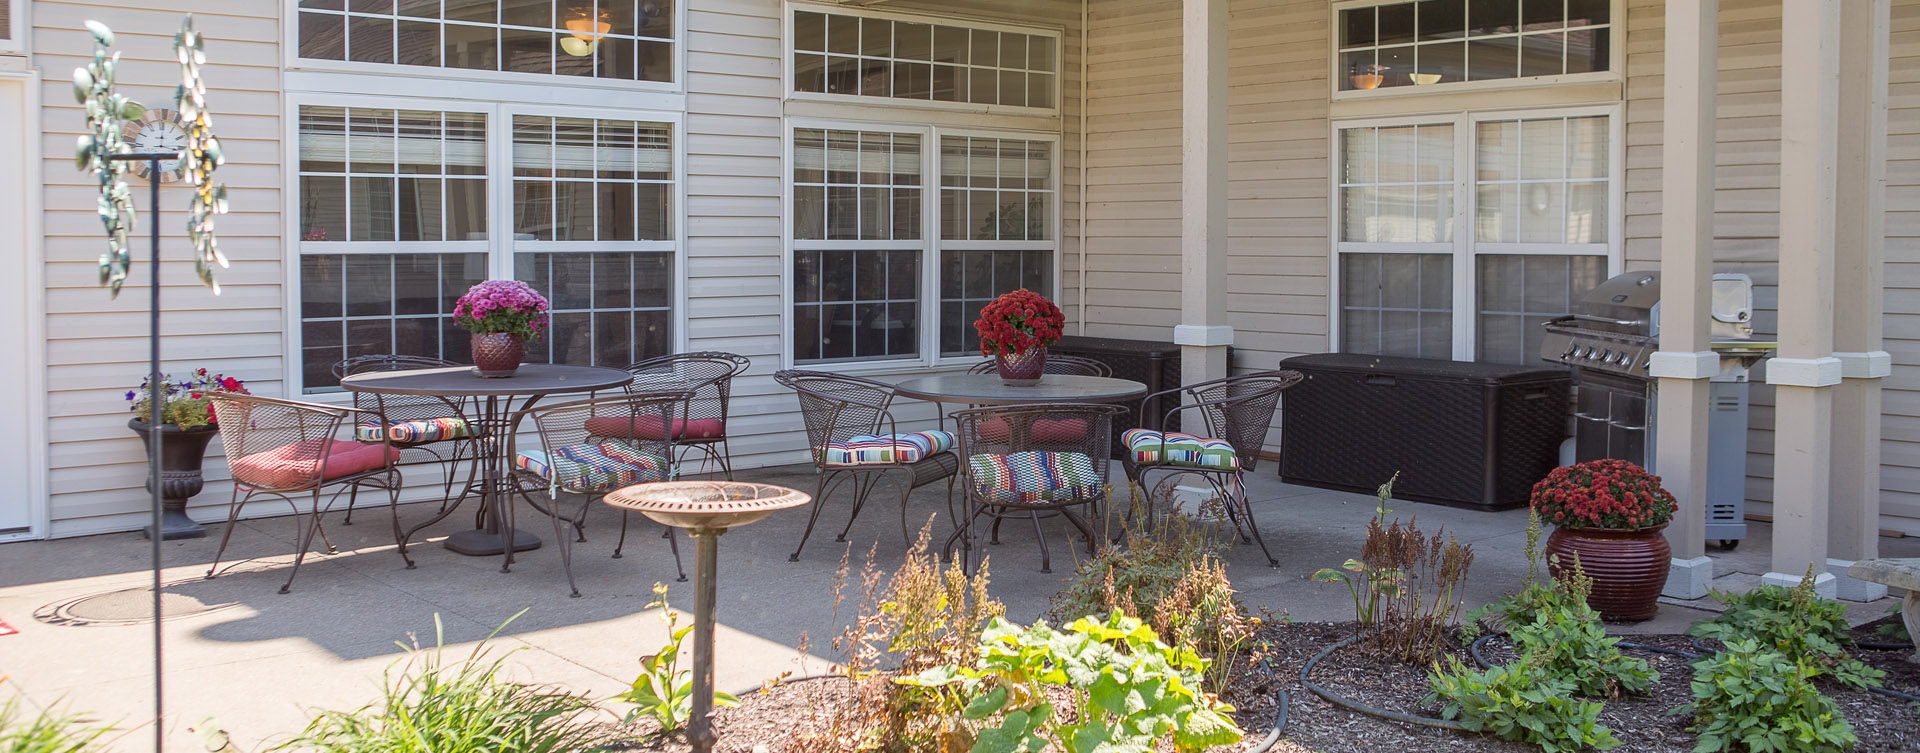 Enjoy bird watching, gardening and barbecuing in our courtyard at Bickford of Davenport